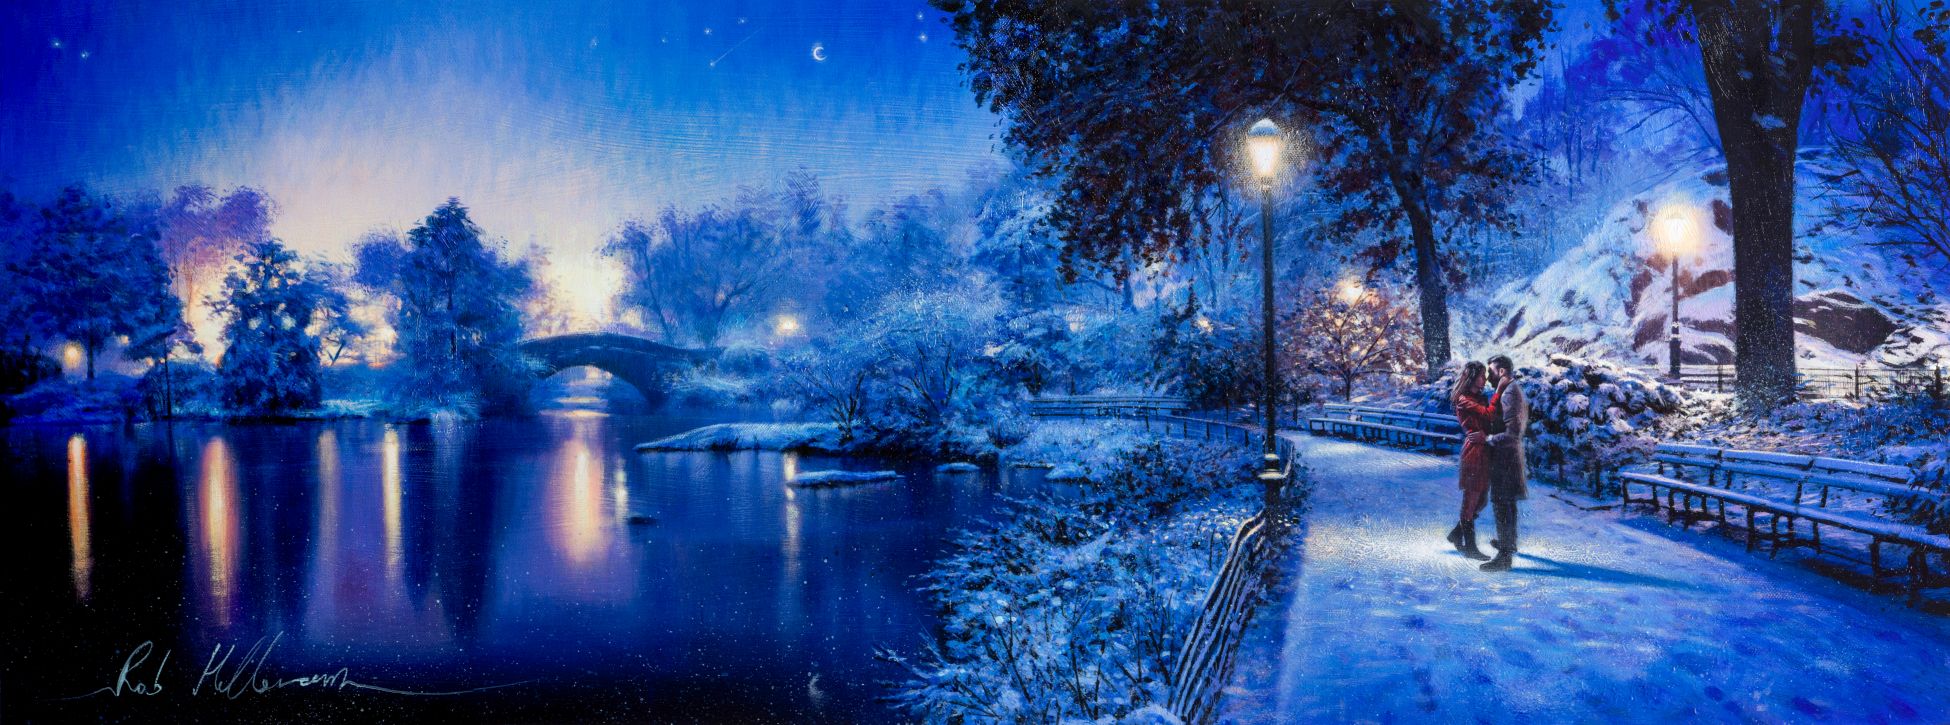 rob-hefferan-i-gave-you-my-heart-in-new-york-central-park